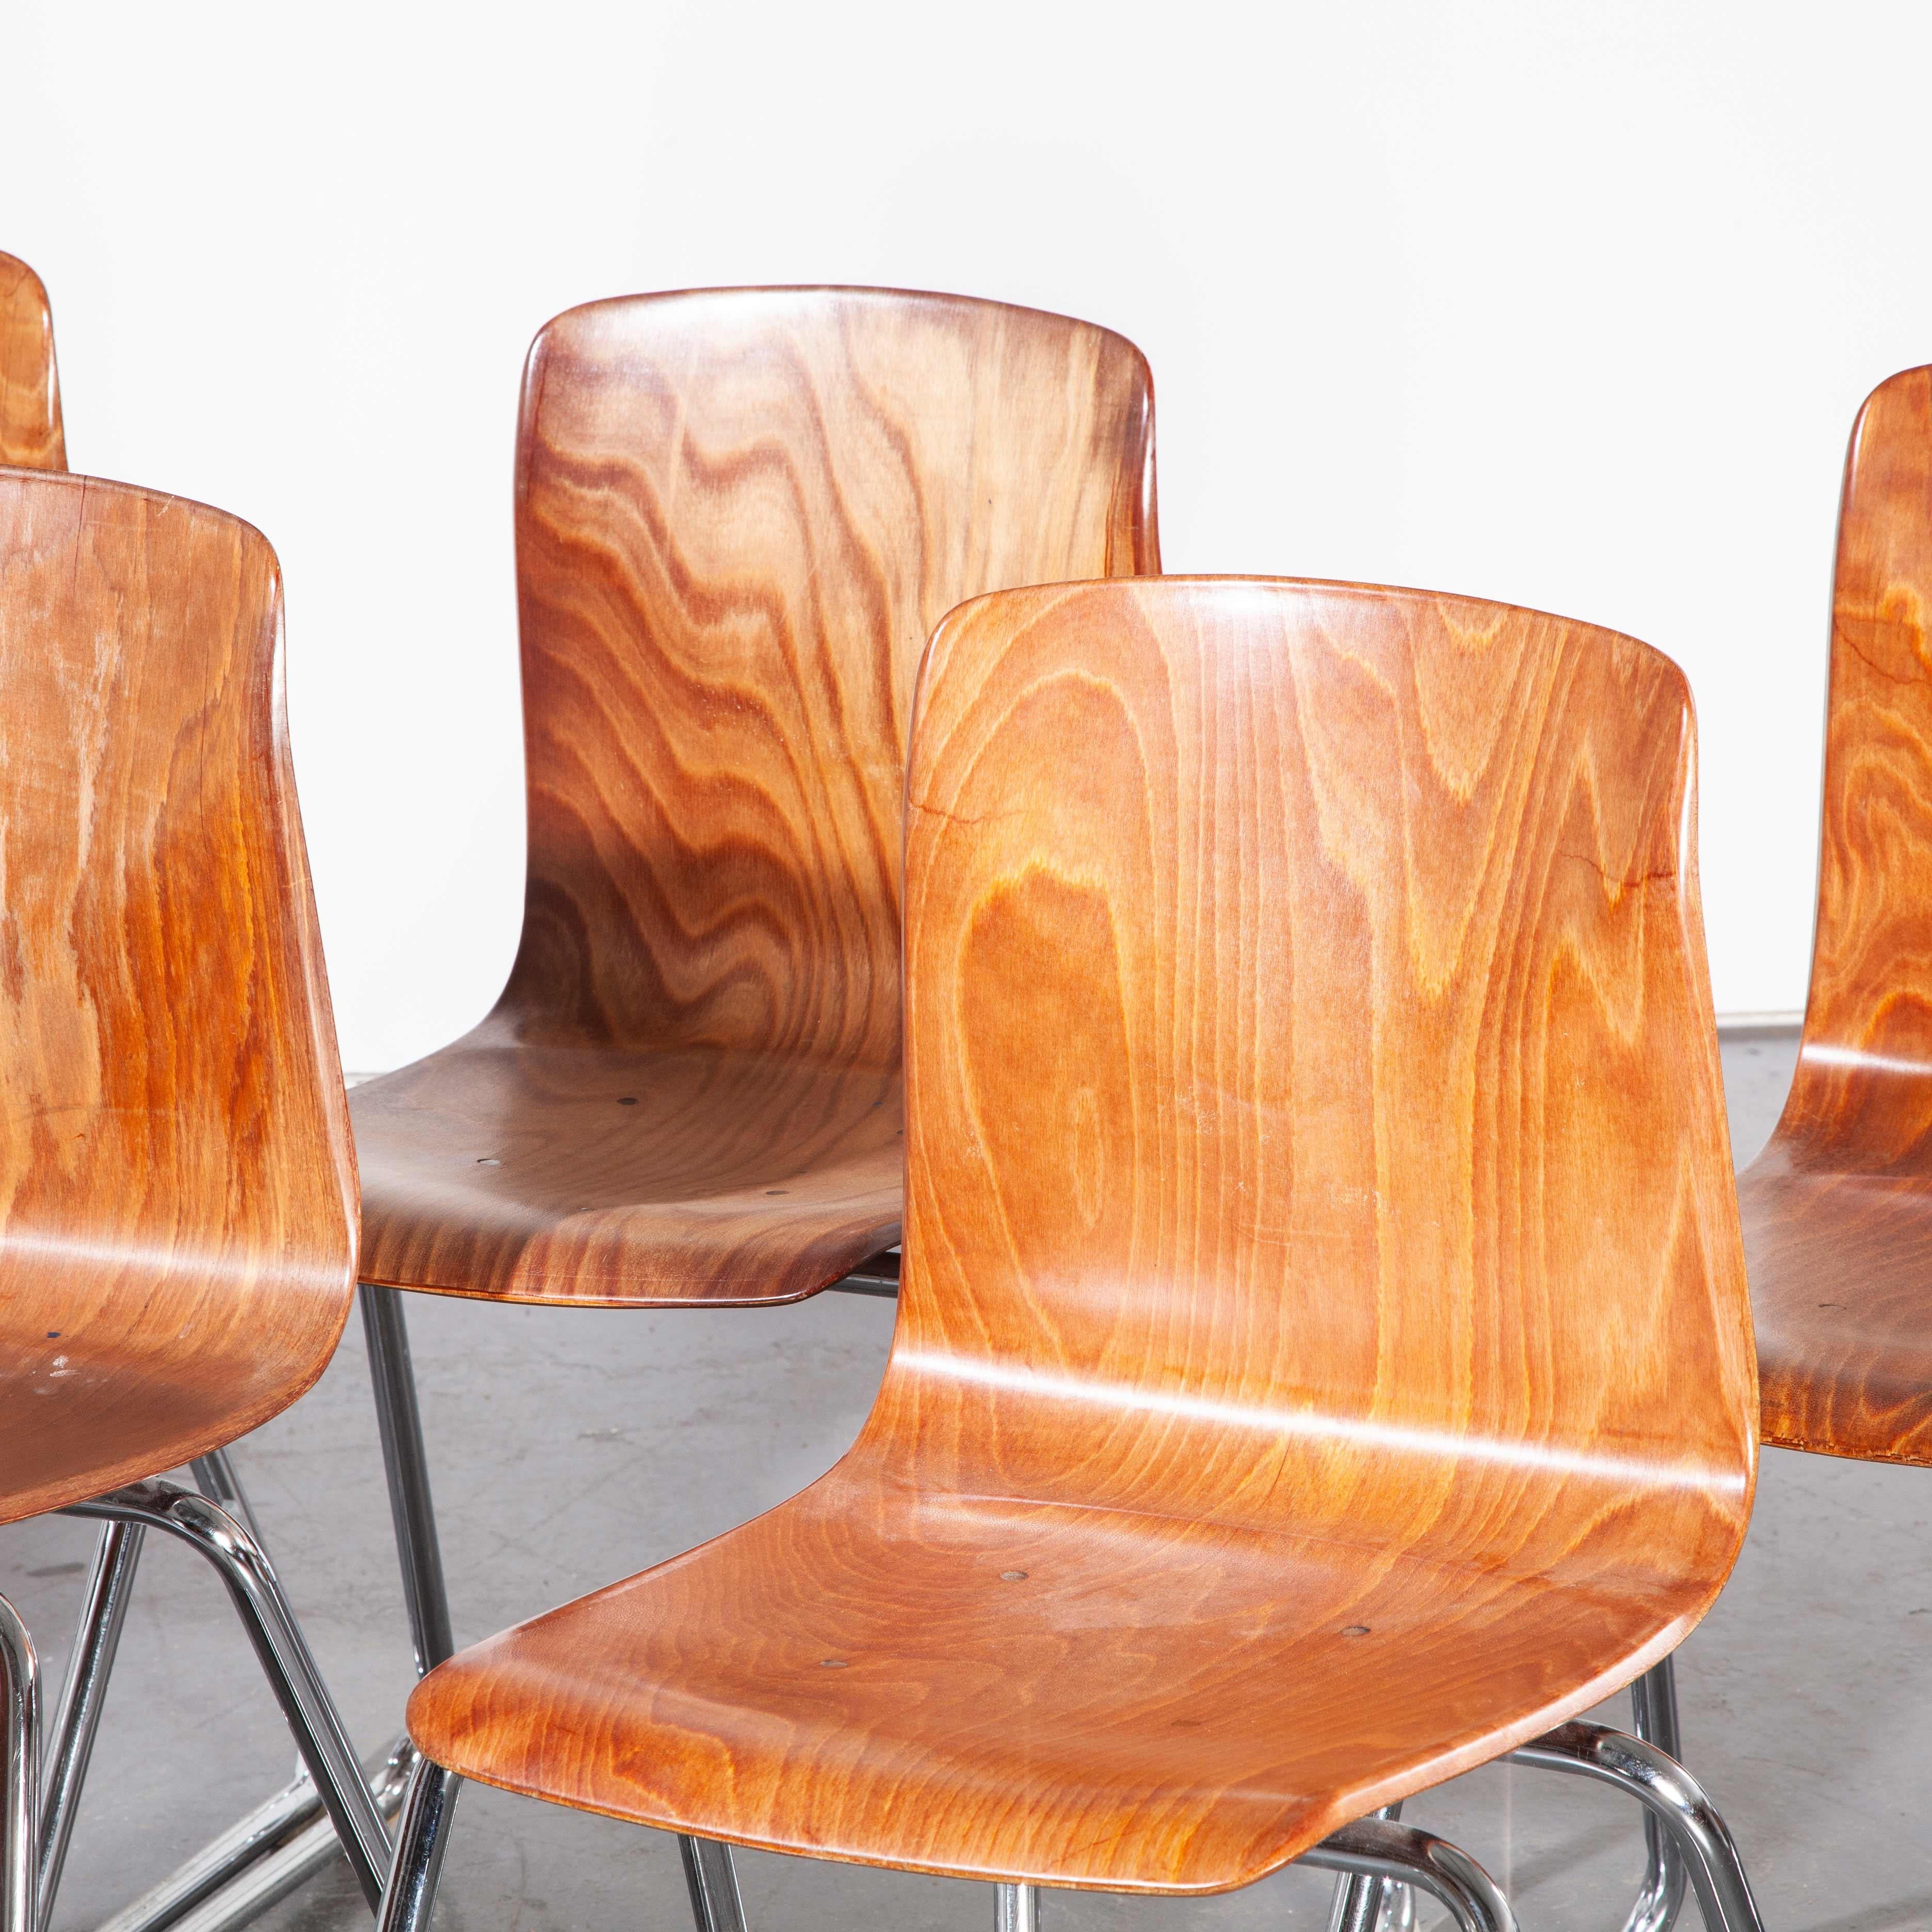 1960s Pagholz dining chairs made in laminated hardwood with chrome legs, set of six, light walnut. Pagholz is an interesting West German company that perfected the manufacturing technique to make laminated furniture with complex multiple shapes.